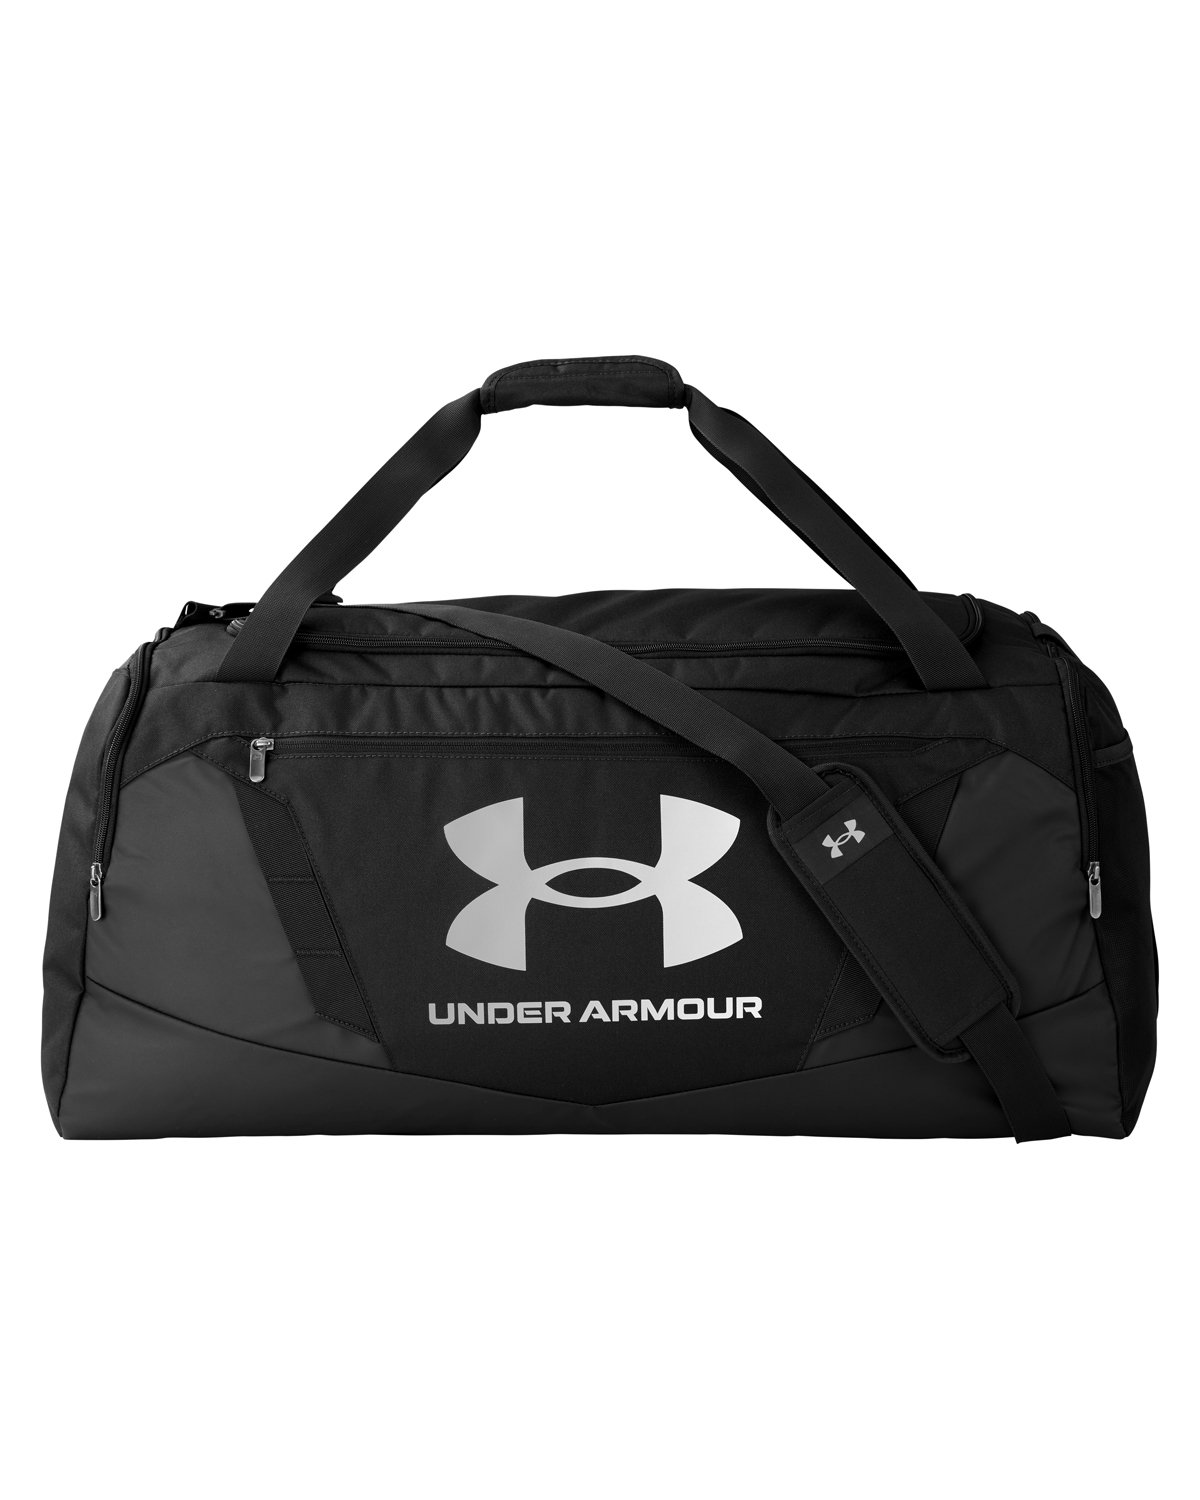 Picture of Under Armour Undeniable 5.0 LG Duffel Bag